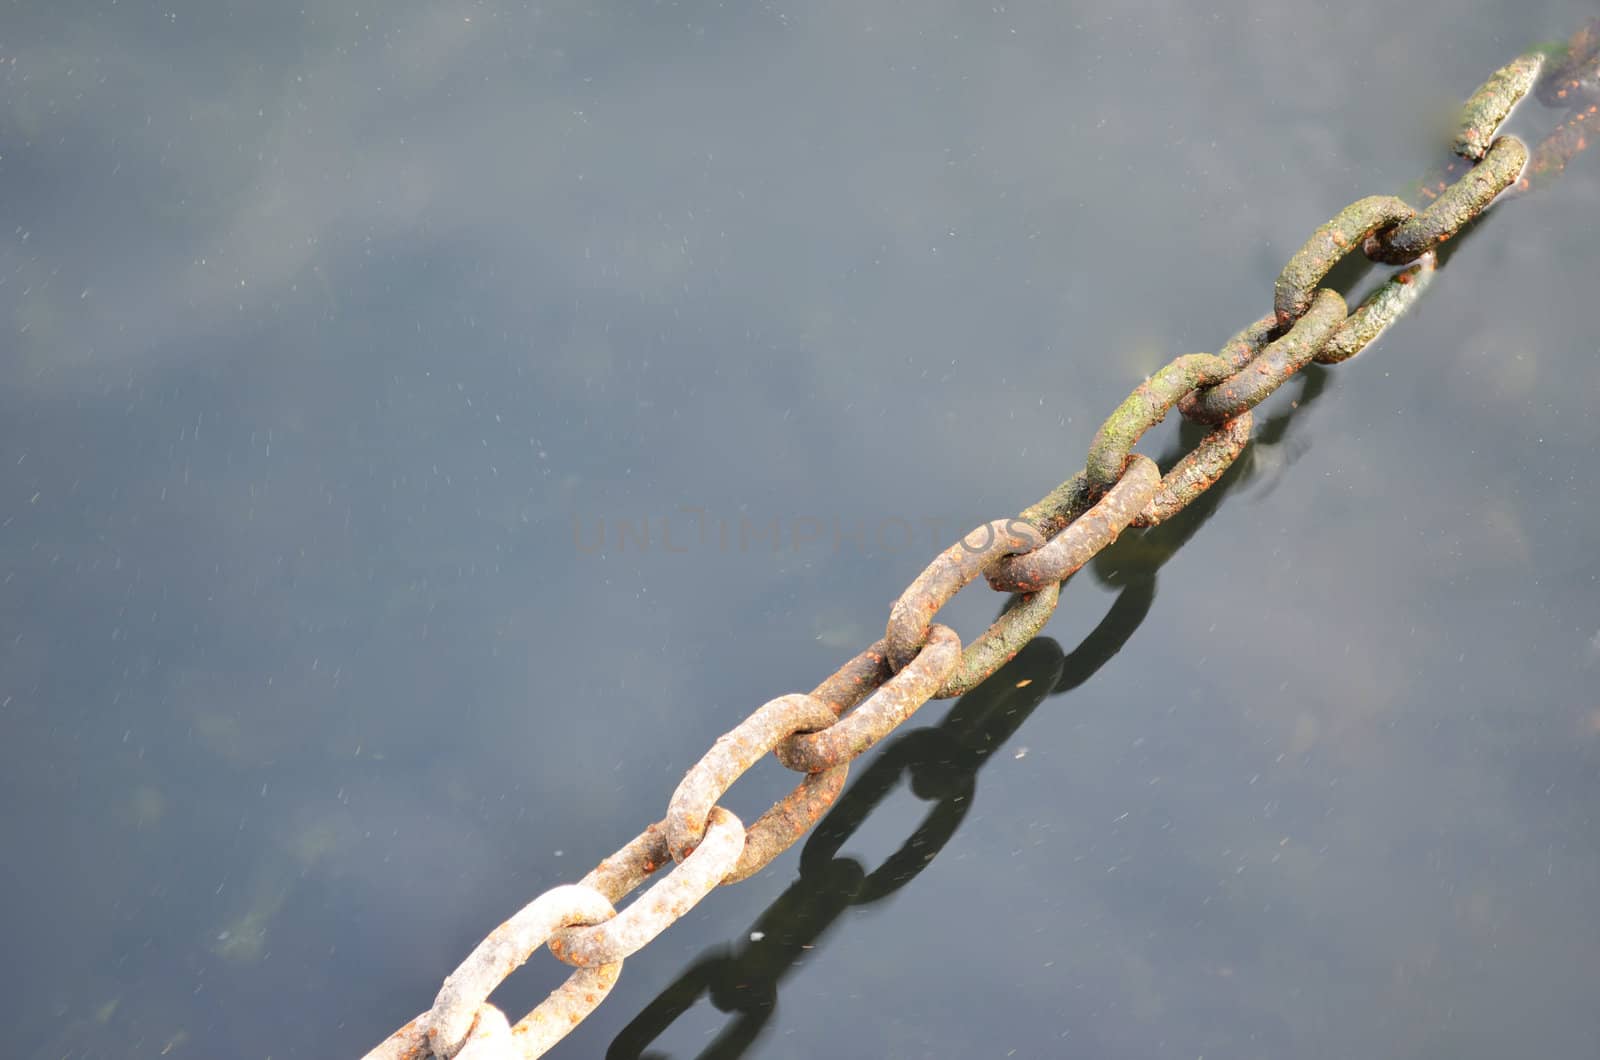 Metal chain under water with copy space by artofphoto